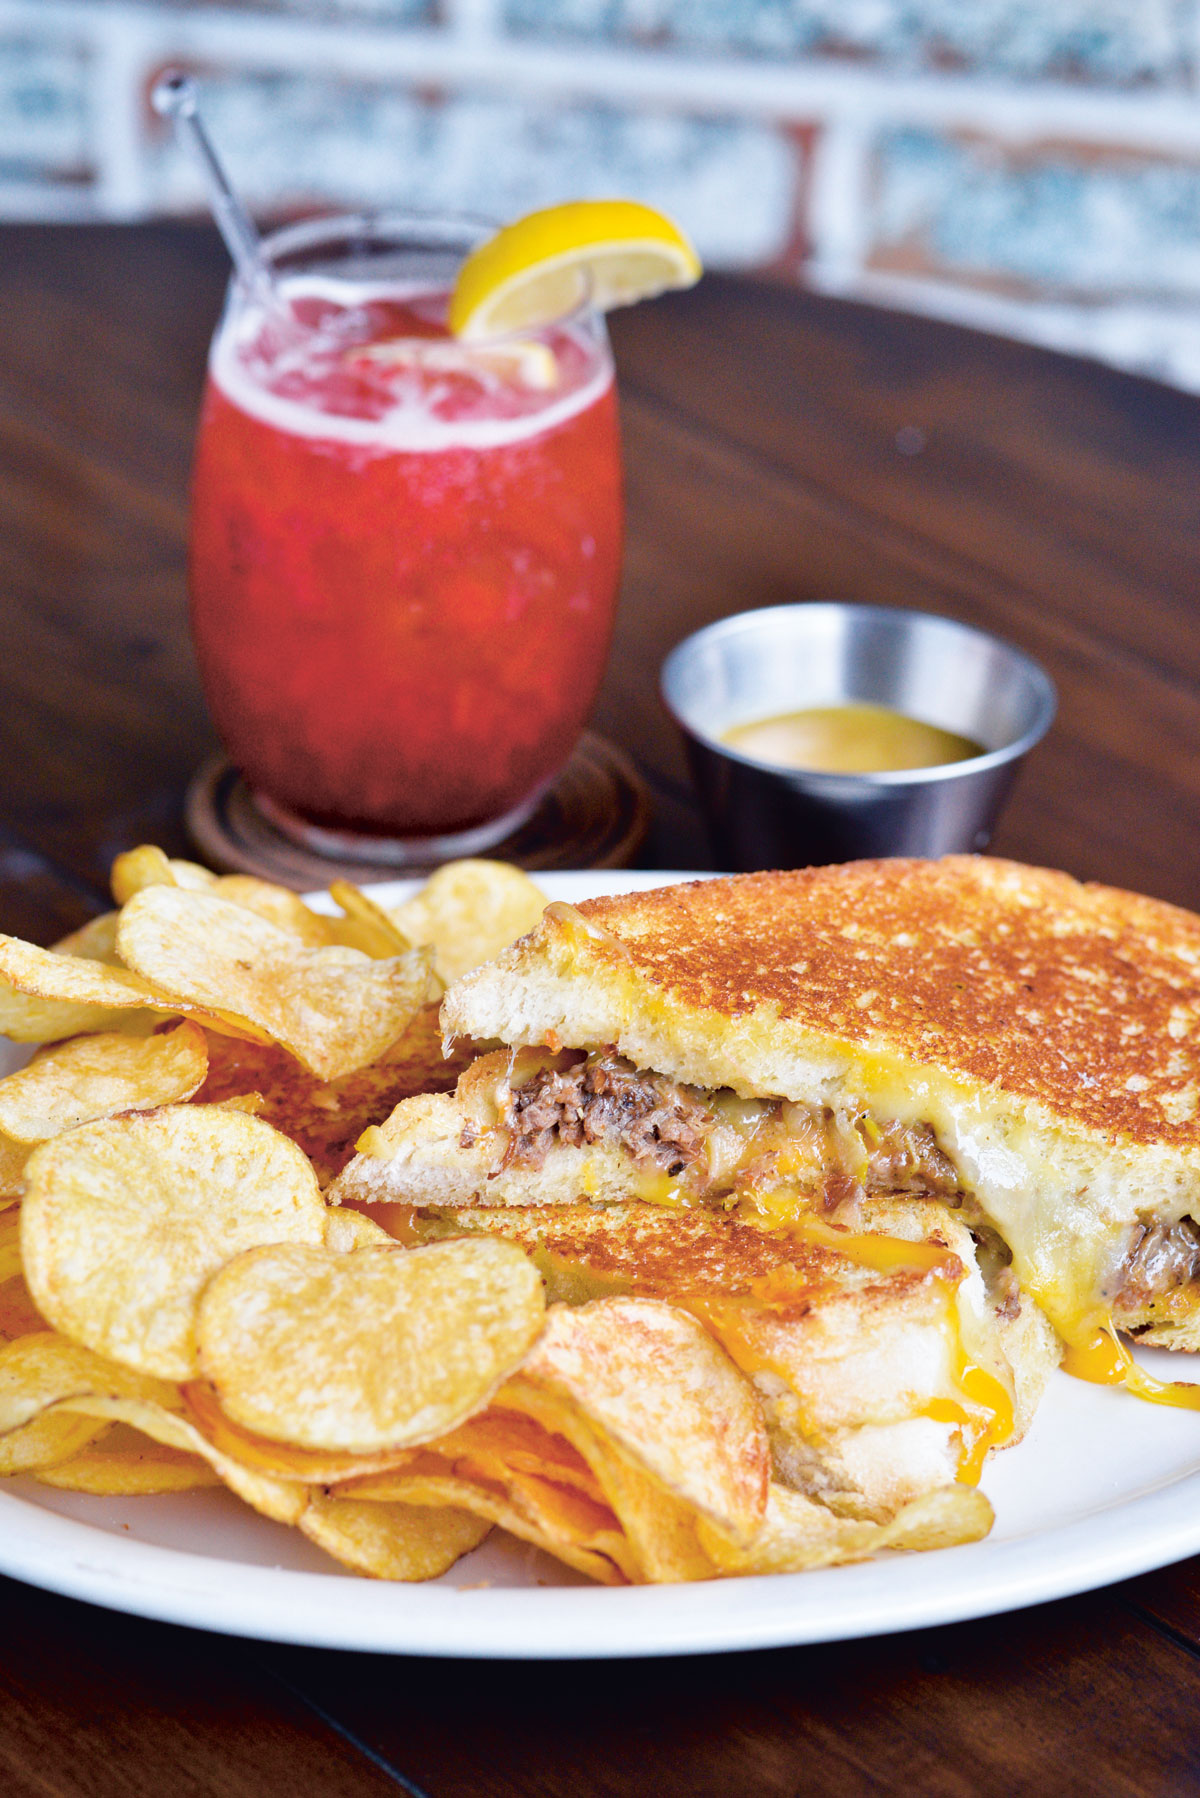 The Bowery's short rib grilled cheese sandwich